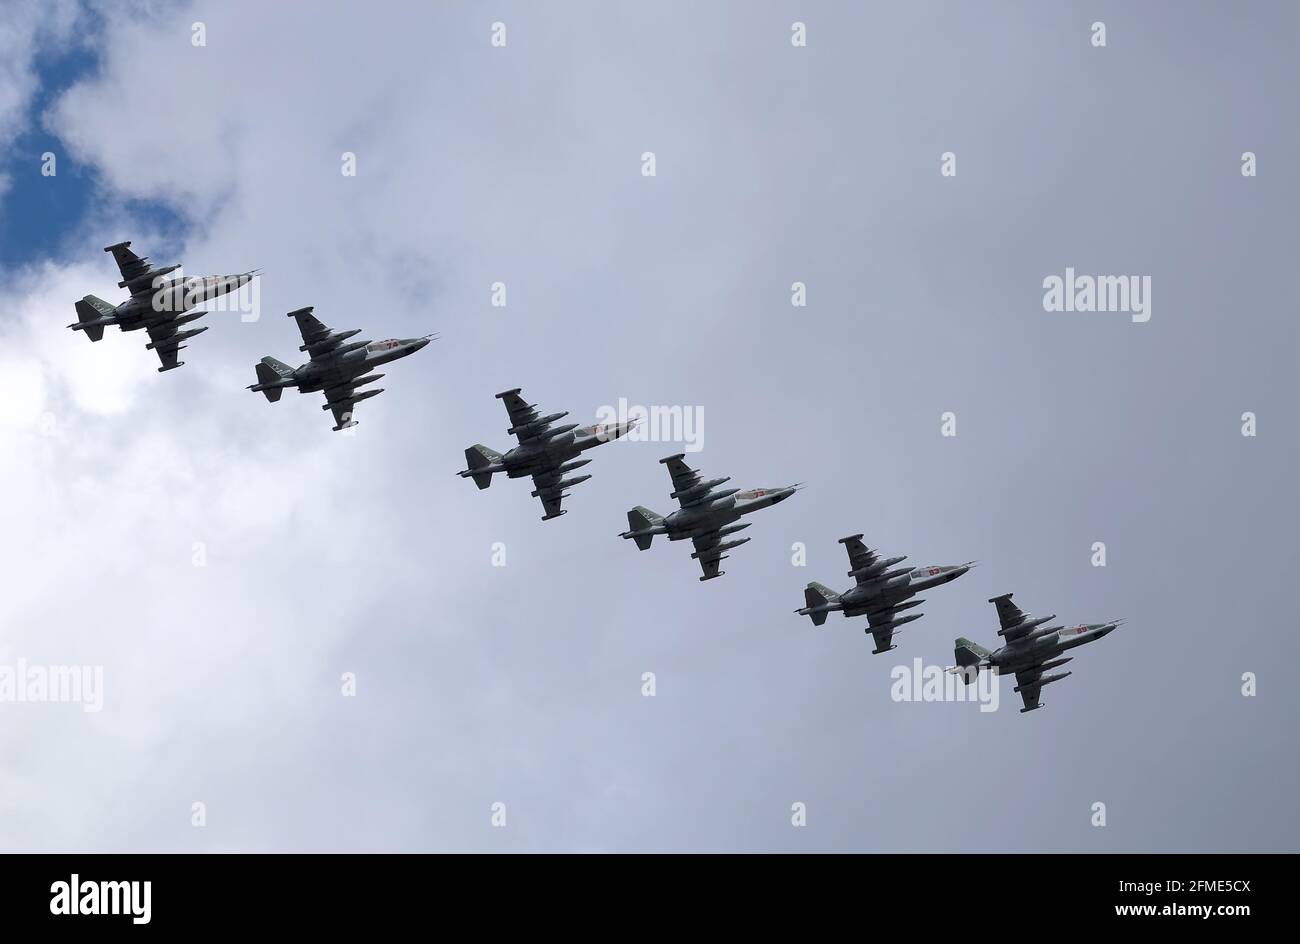 MOSCOW, RUSSIA - MAY 7, 2021: Group of six Russian military tactical frontline bombers SU-25 Frogfoot fast flying on parade rehearsal in cloudy sky Stock Photo